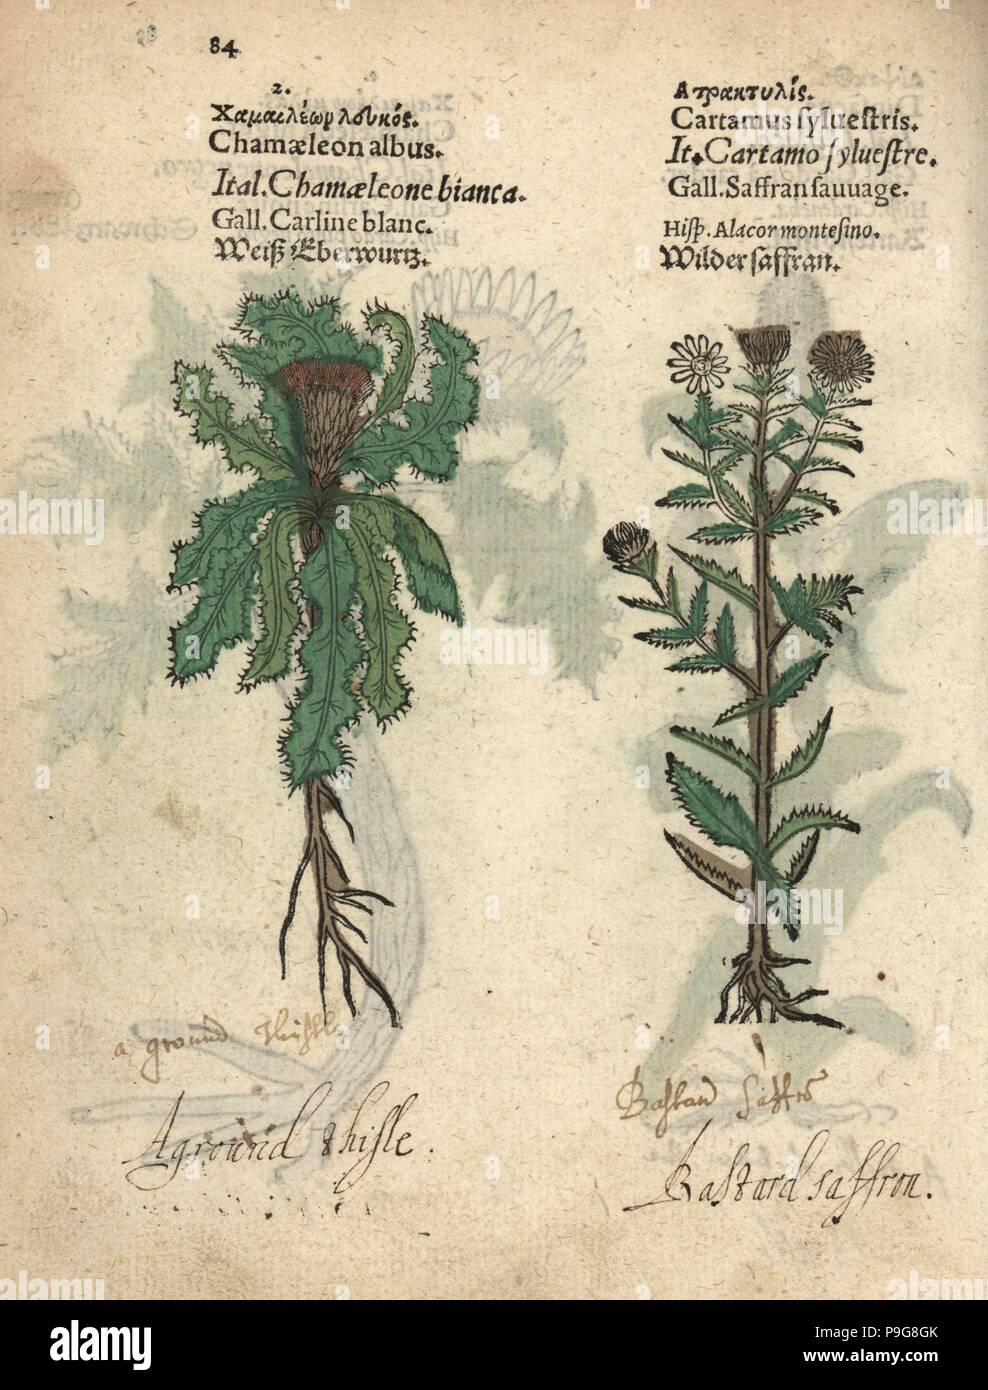 Stemless carline thistle, Carlina acaulis, and wild safflower, Carthamus oxyacanthus. Handcoloured woodblock engraving of a botanical illustration from Adam Lonicer's Krauterbuch, or Herbal, Frankfurt, 1557. This from a 17th century pirate edition or atlas of illustrations only, with captions in Latin, Greek, French, Italian, German, and in English manuscript. Stock Photo